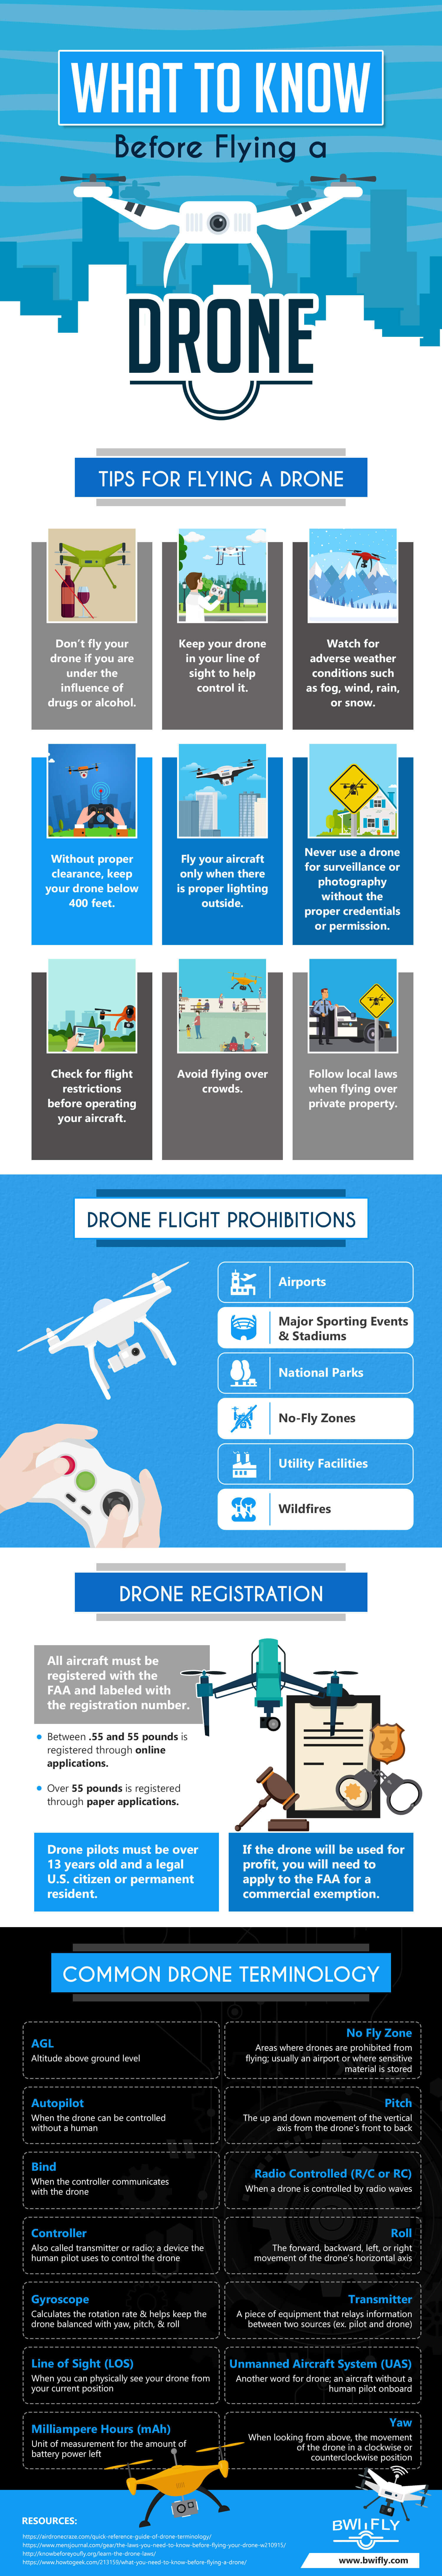 What to Know Before Flying a Drone